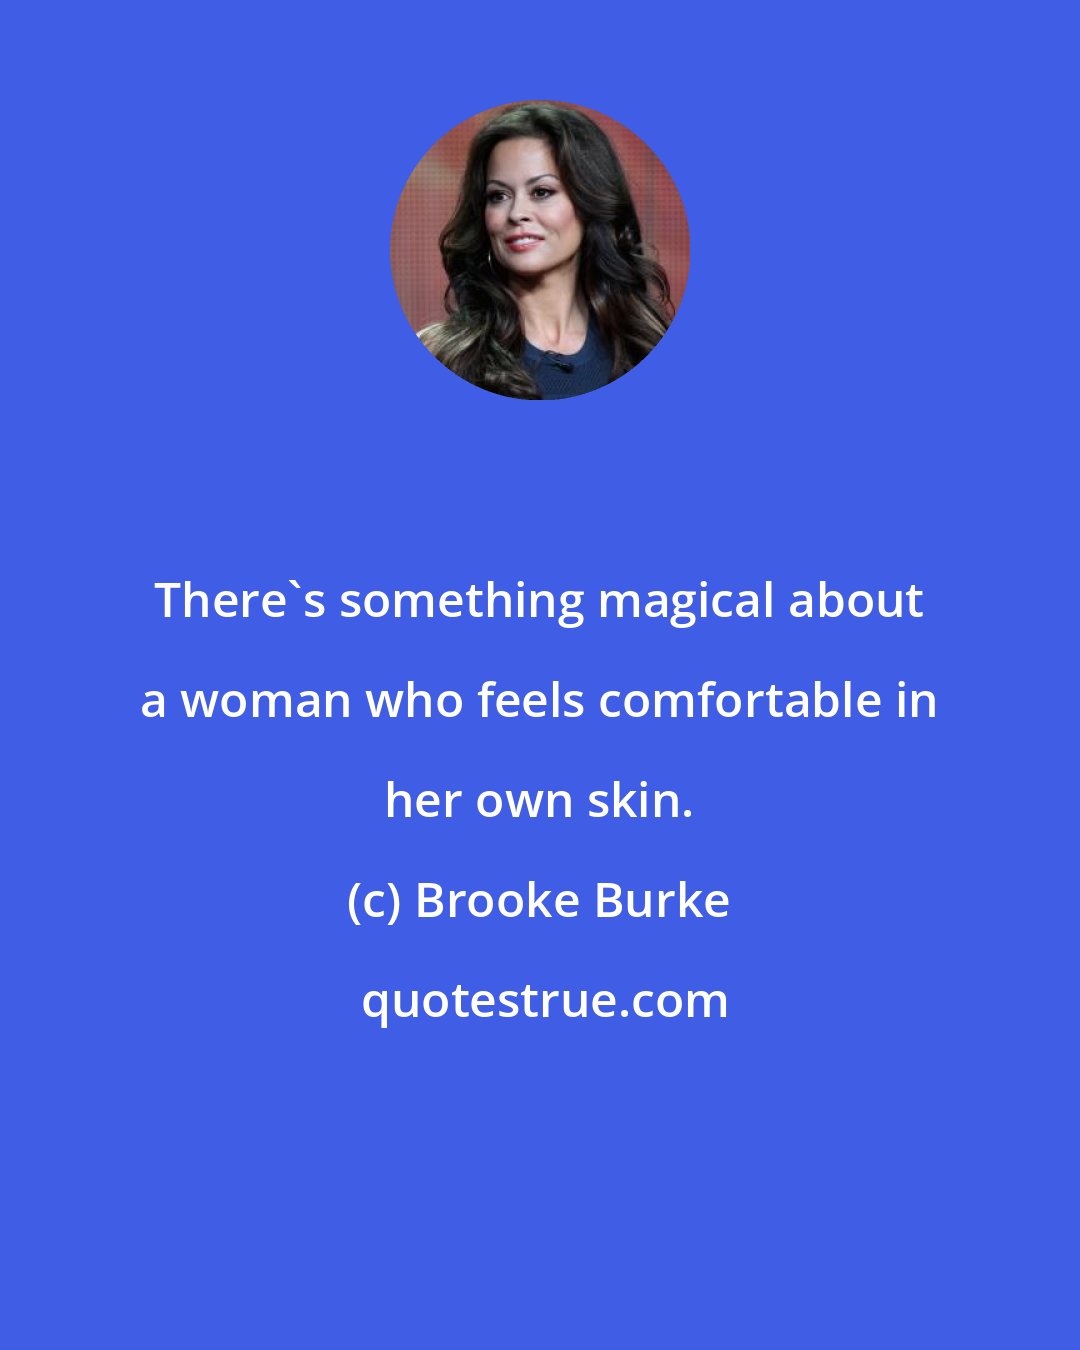 Brooke Burke: There's something magical about a woman who feels comfortable in her own skin.